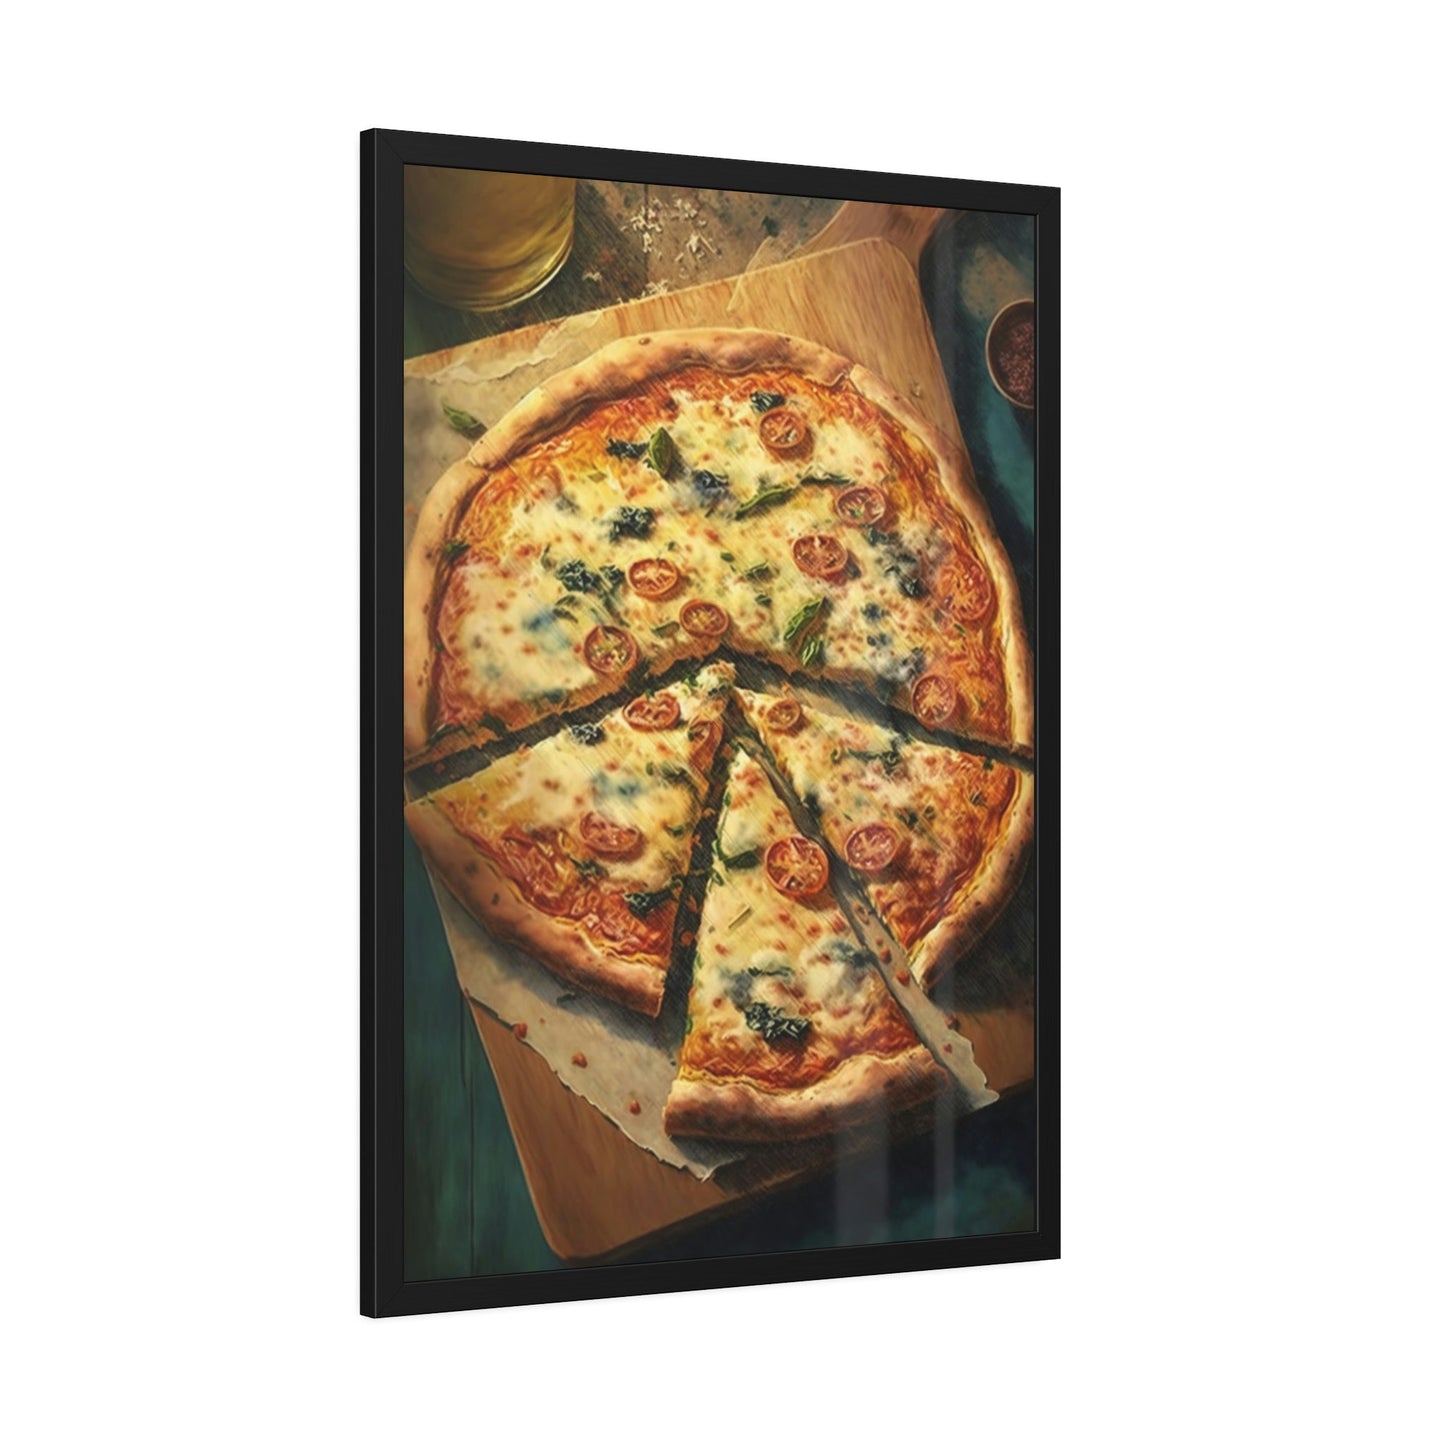 Pizza Perfection: Natural Canvas Prints of Artfully Arranged Pizza Toppings